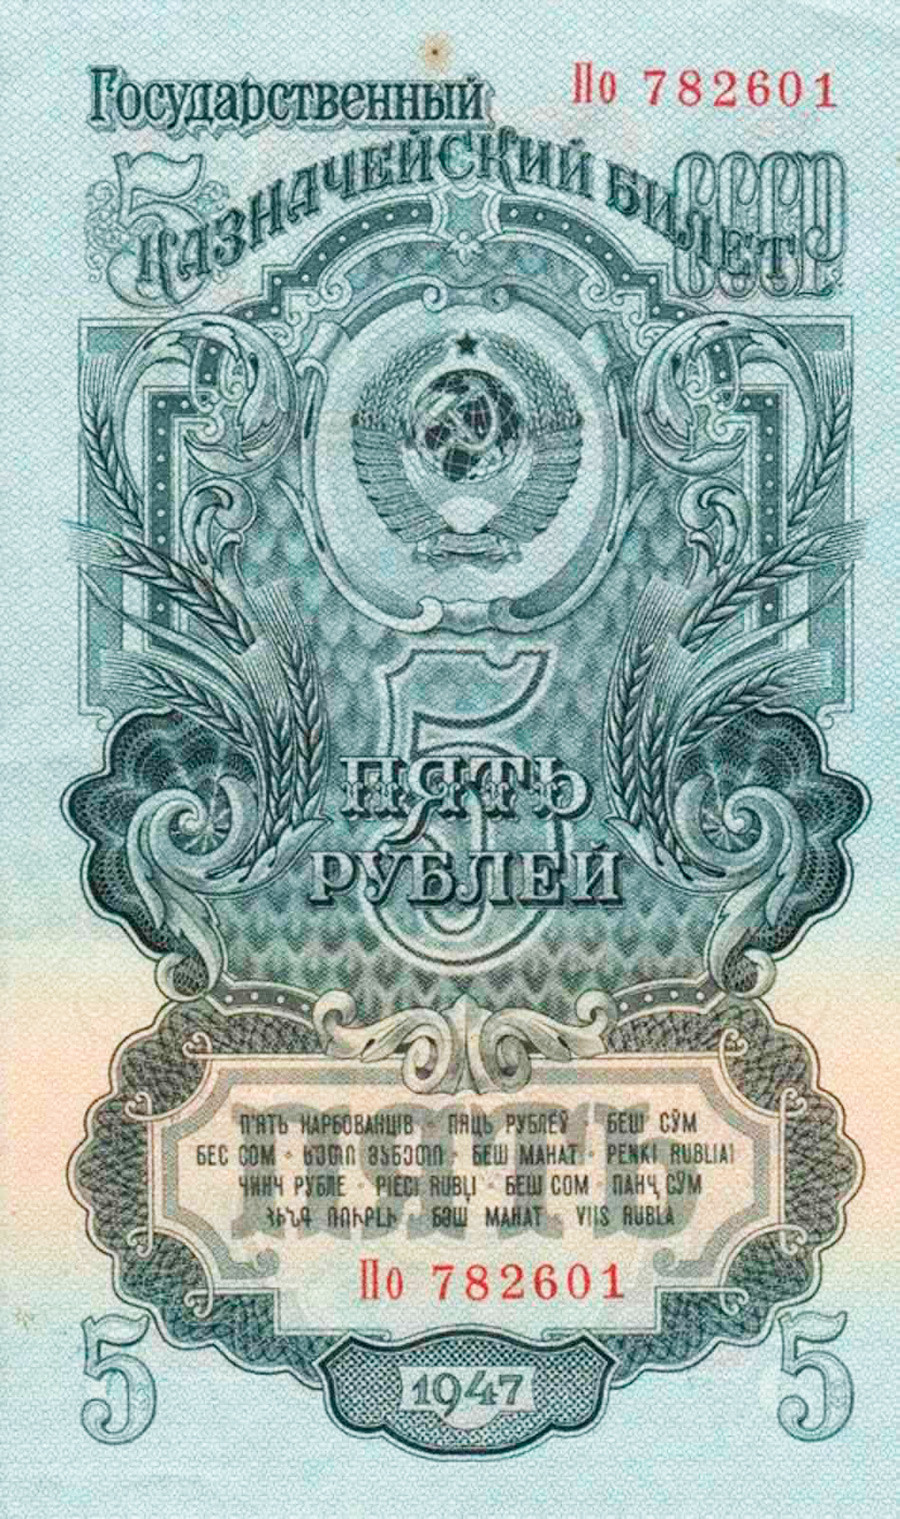 A 5-ruble banknote (1947)